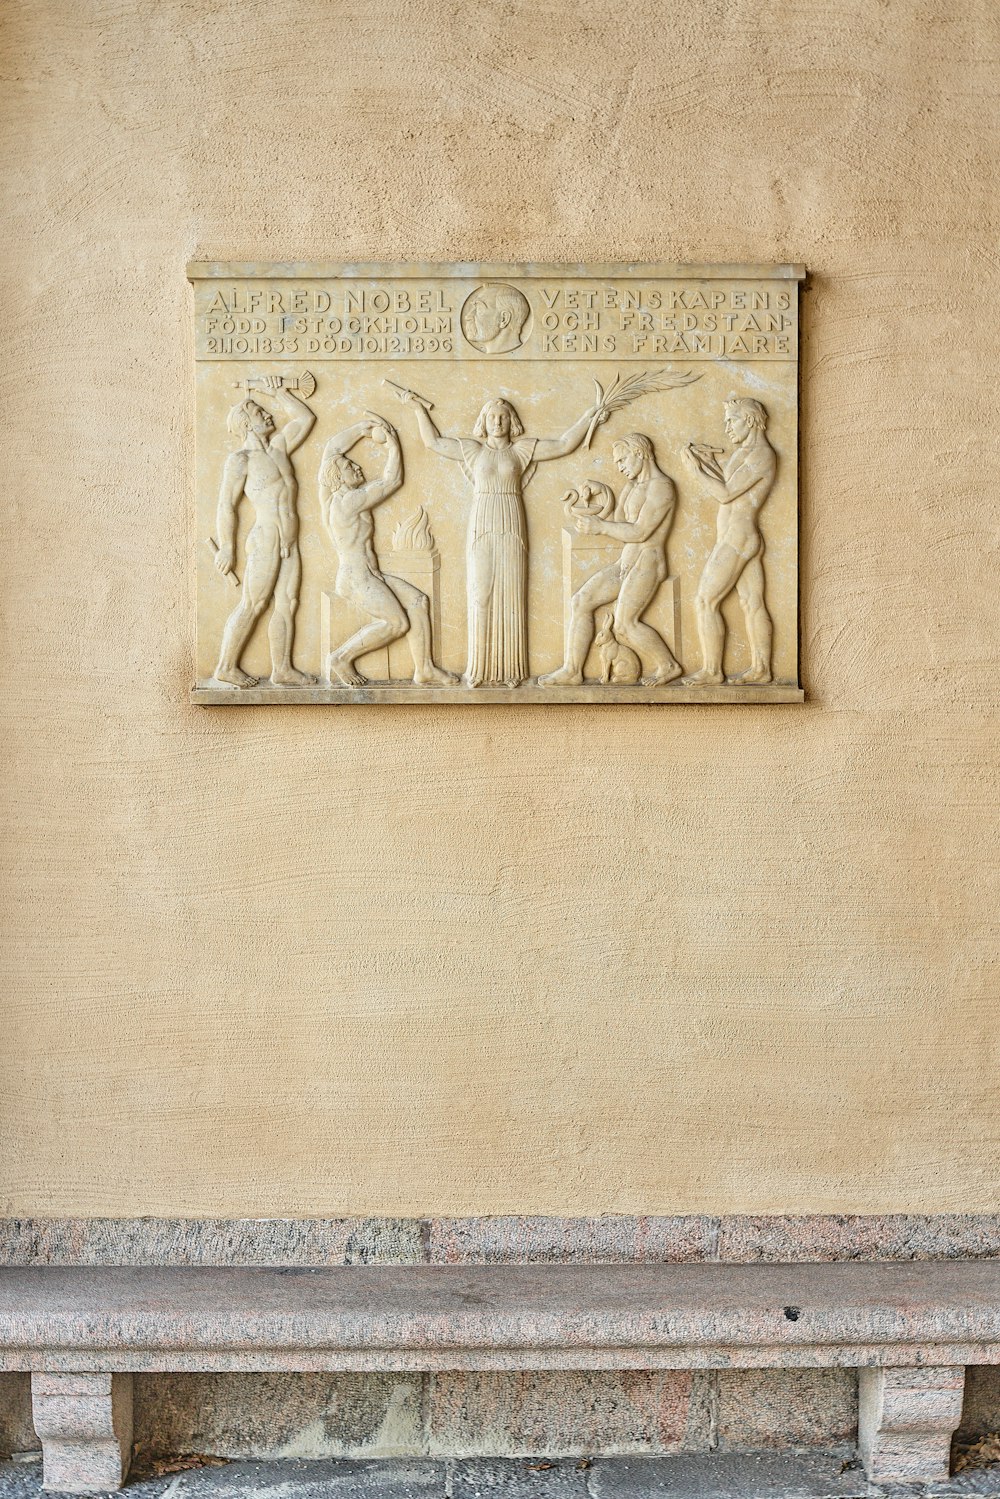 a stone carving of a man and woman on a wall